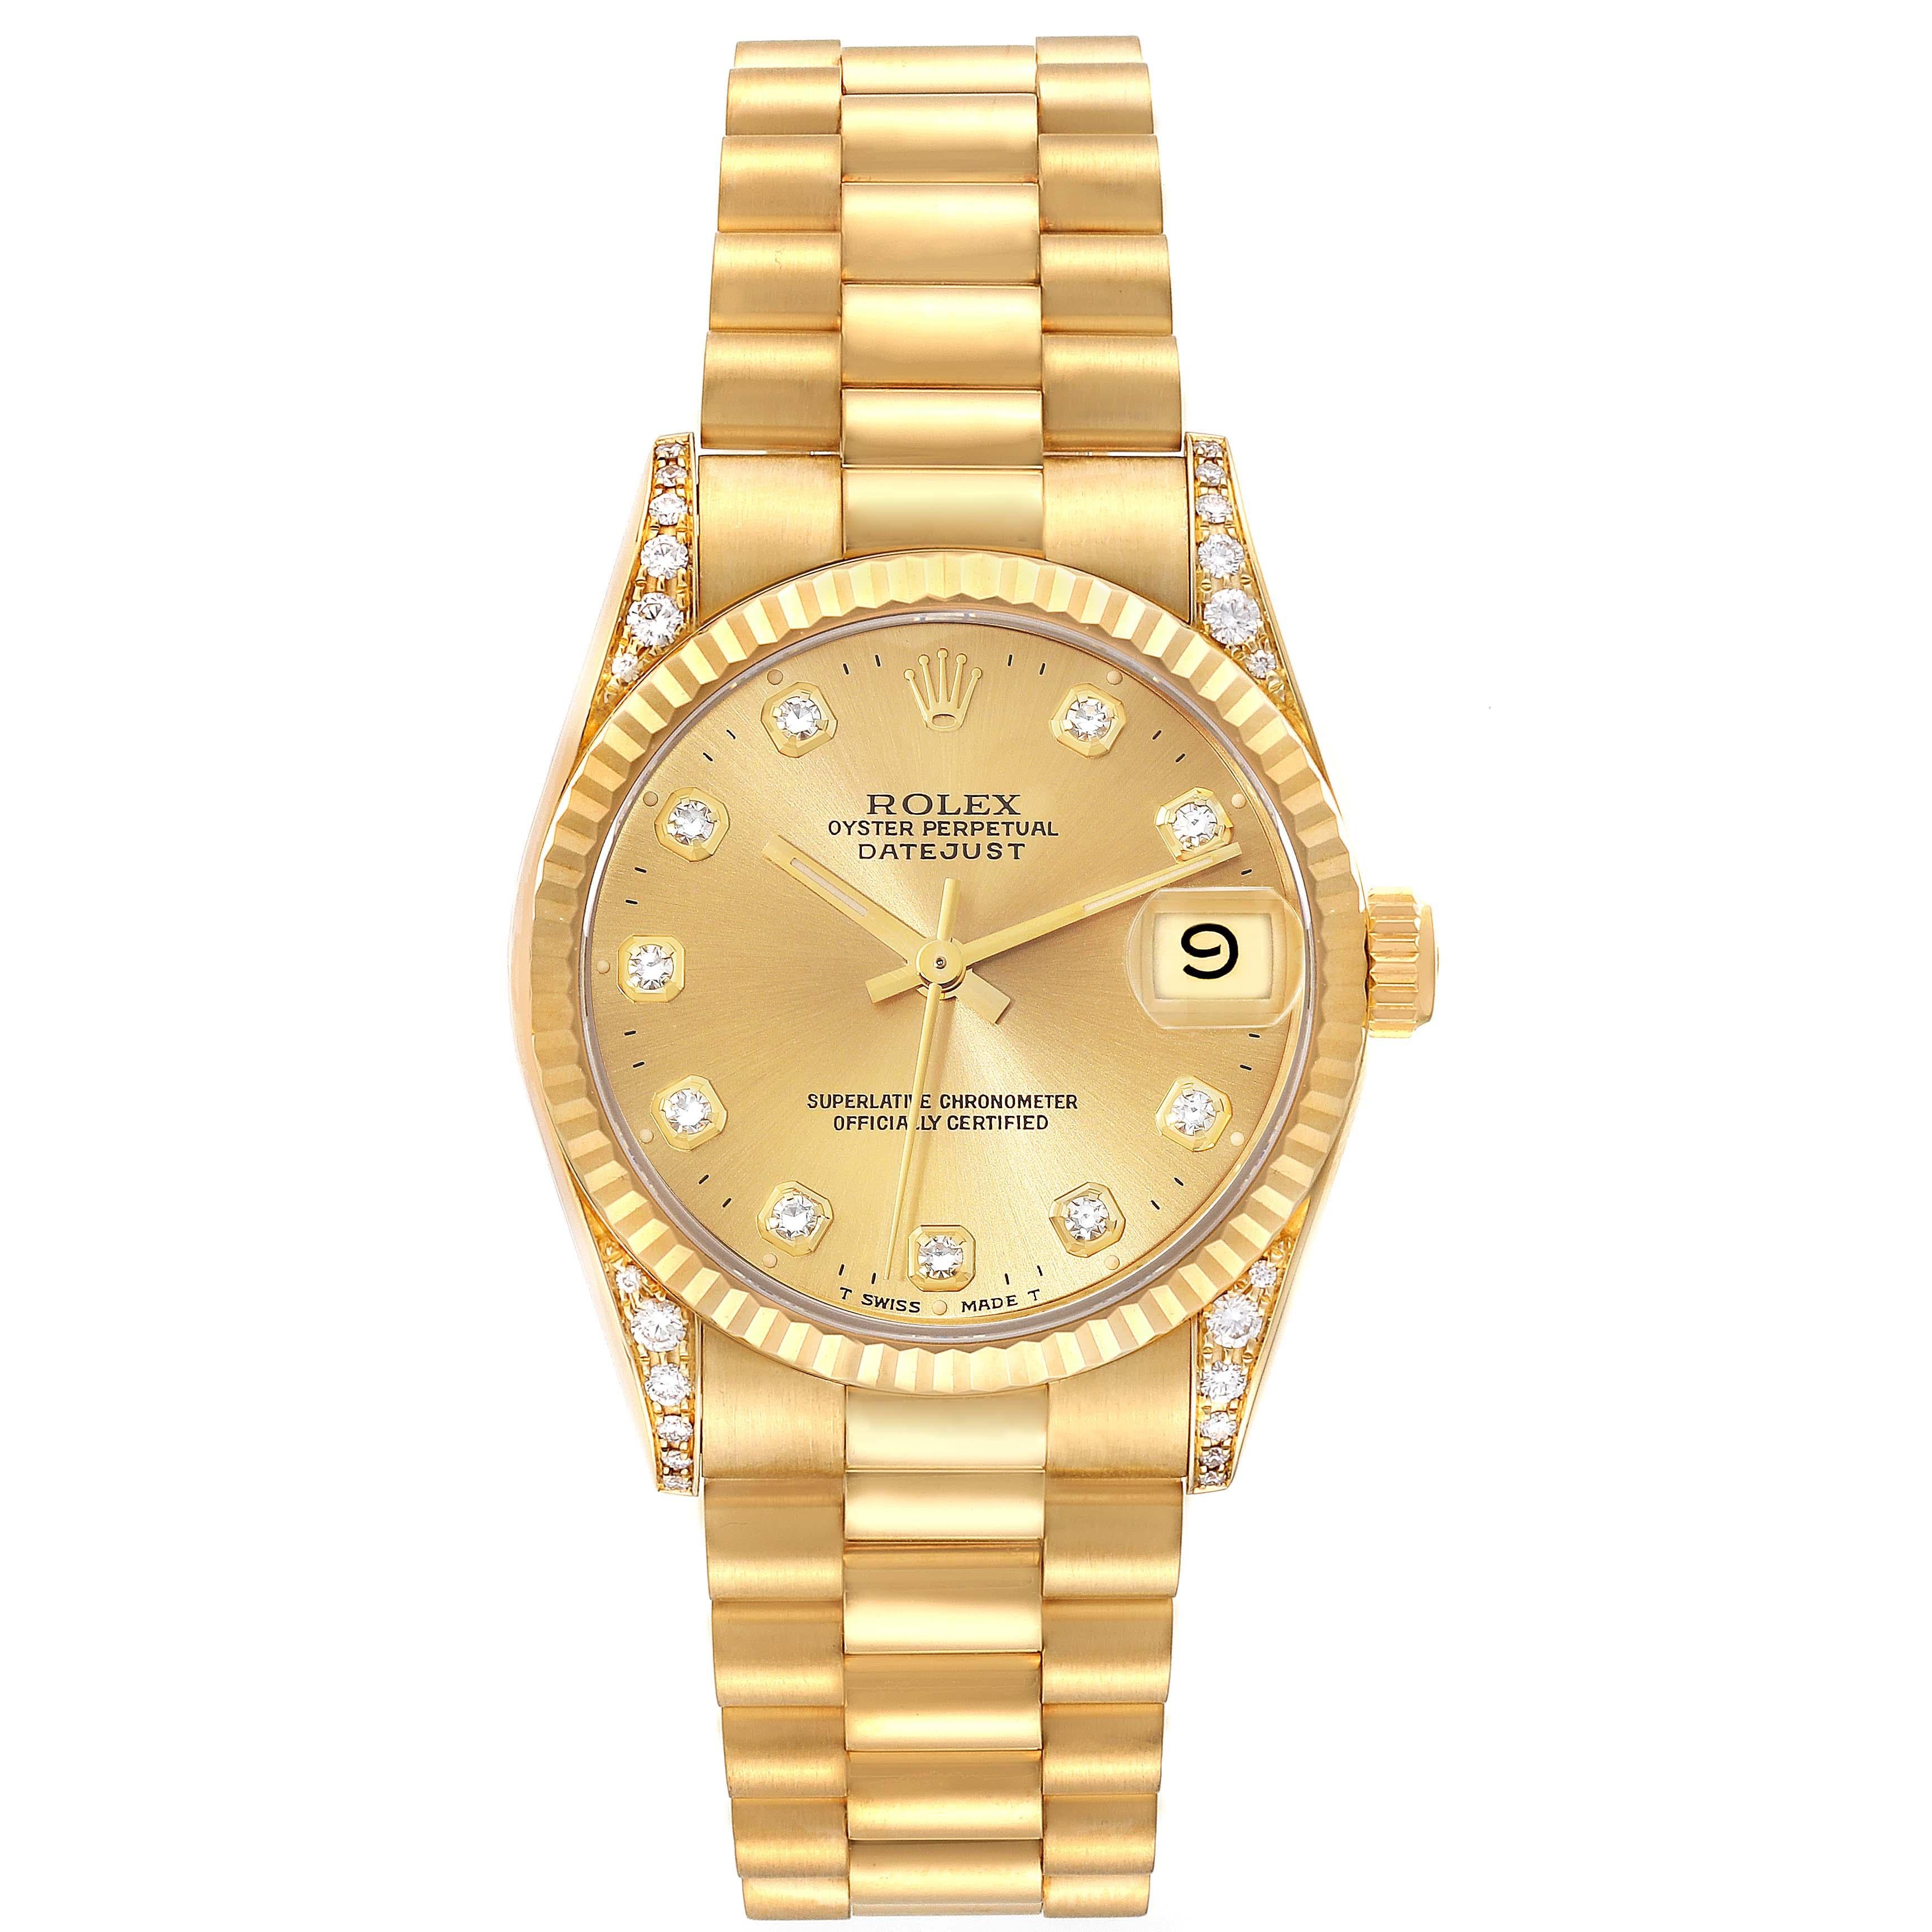 Rolex President Midsize Champagne Dial Yellow Gold Diamond Ladies Watch 68238. Officially certified chronometer automatic self-winding movement. 18k yellow gold oyster case 31.0 mm in diameter. Rolex logo on a crown. Original Rolex factory diamond